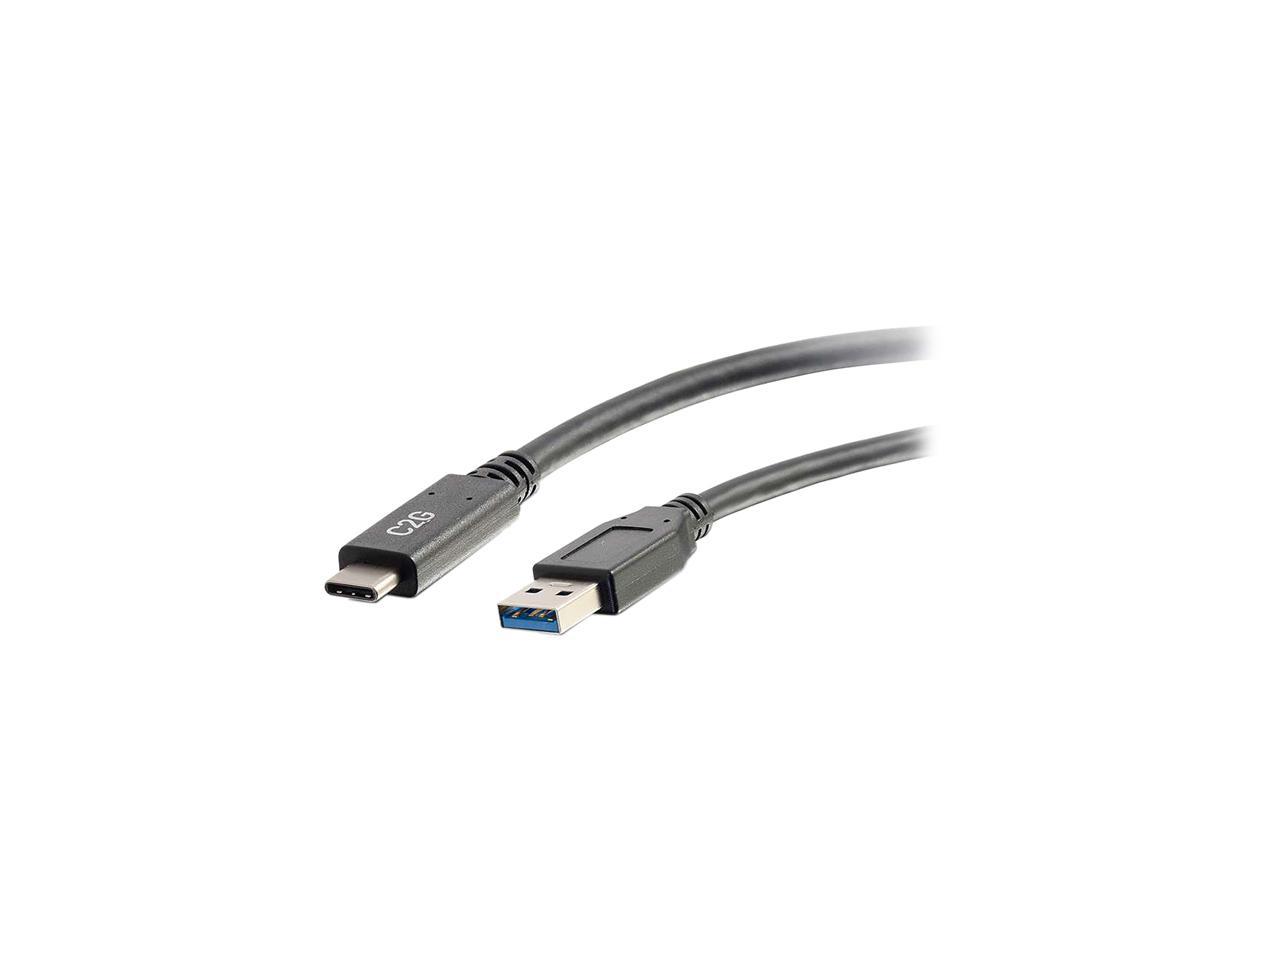 opleiding Grondwet Aanbevolen C2G 28832 USB 3.0 USB-C to USB-A Cable M/M, Black (USB IF Certified) (6 Feet,  1.82 Meters)